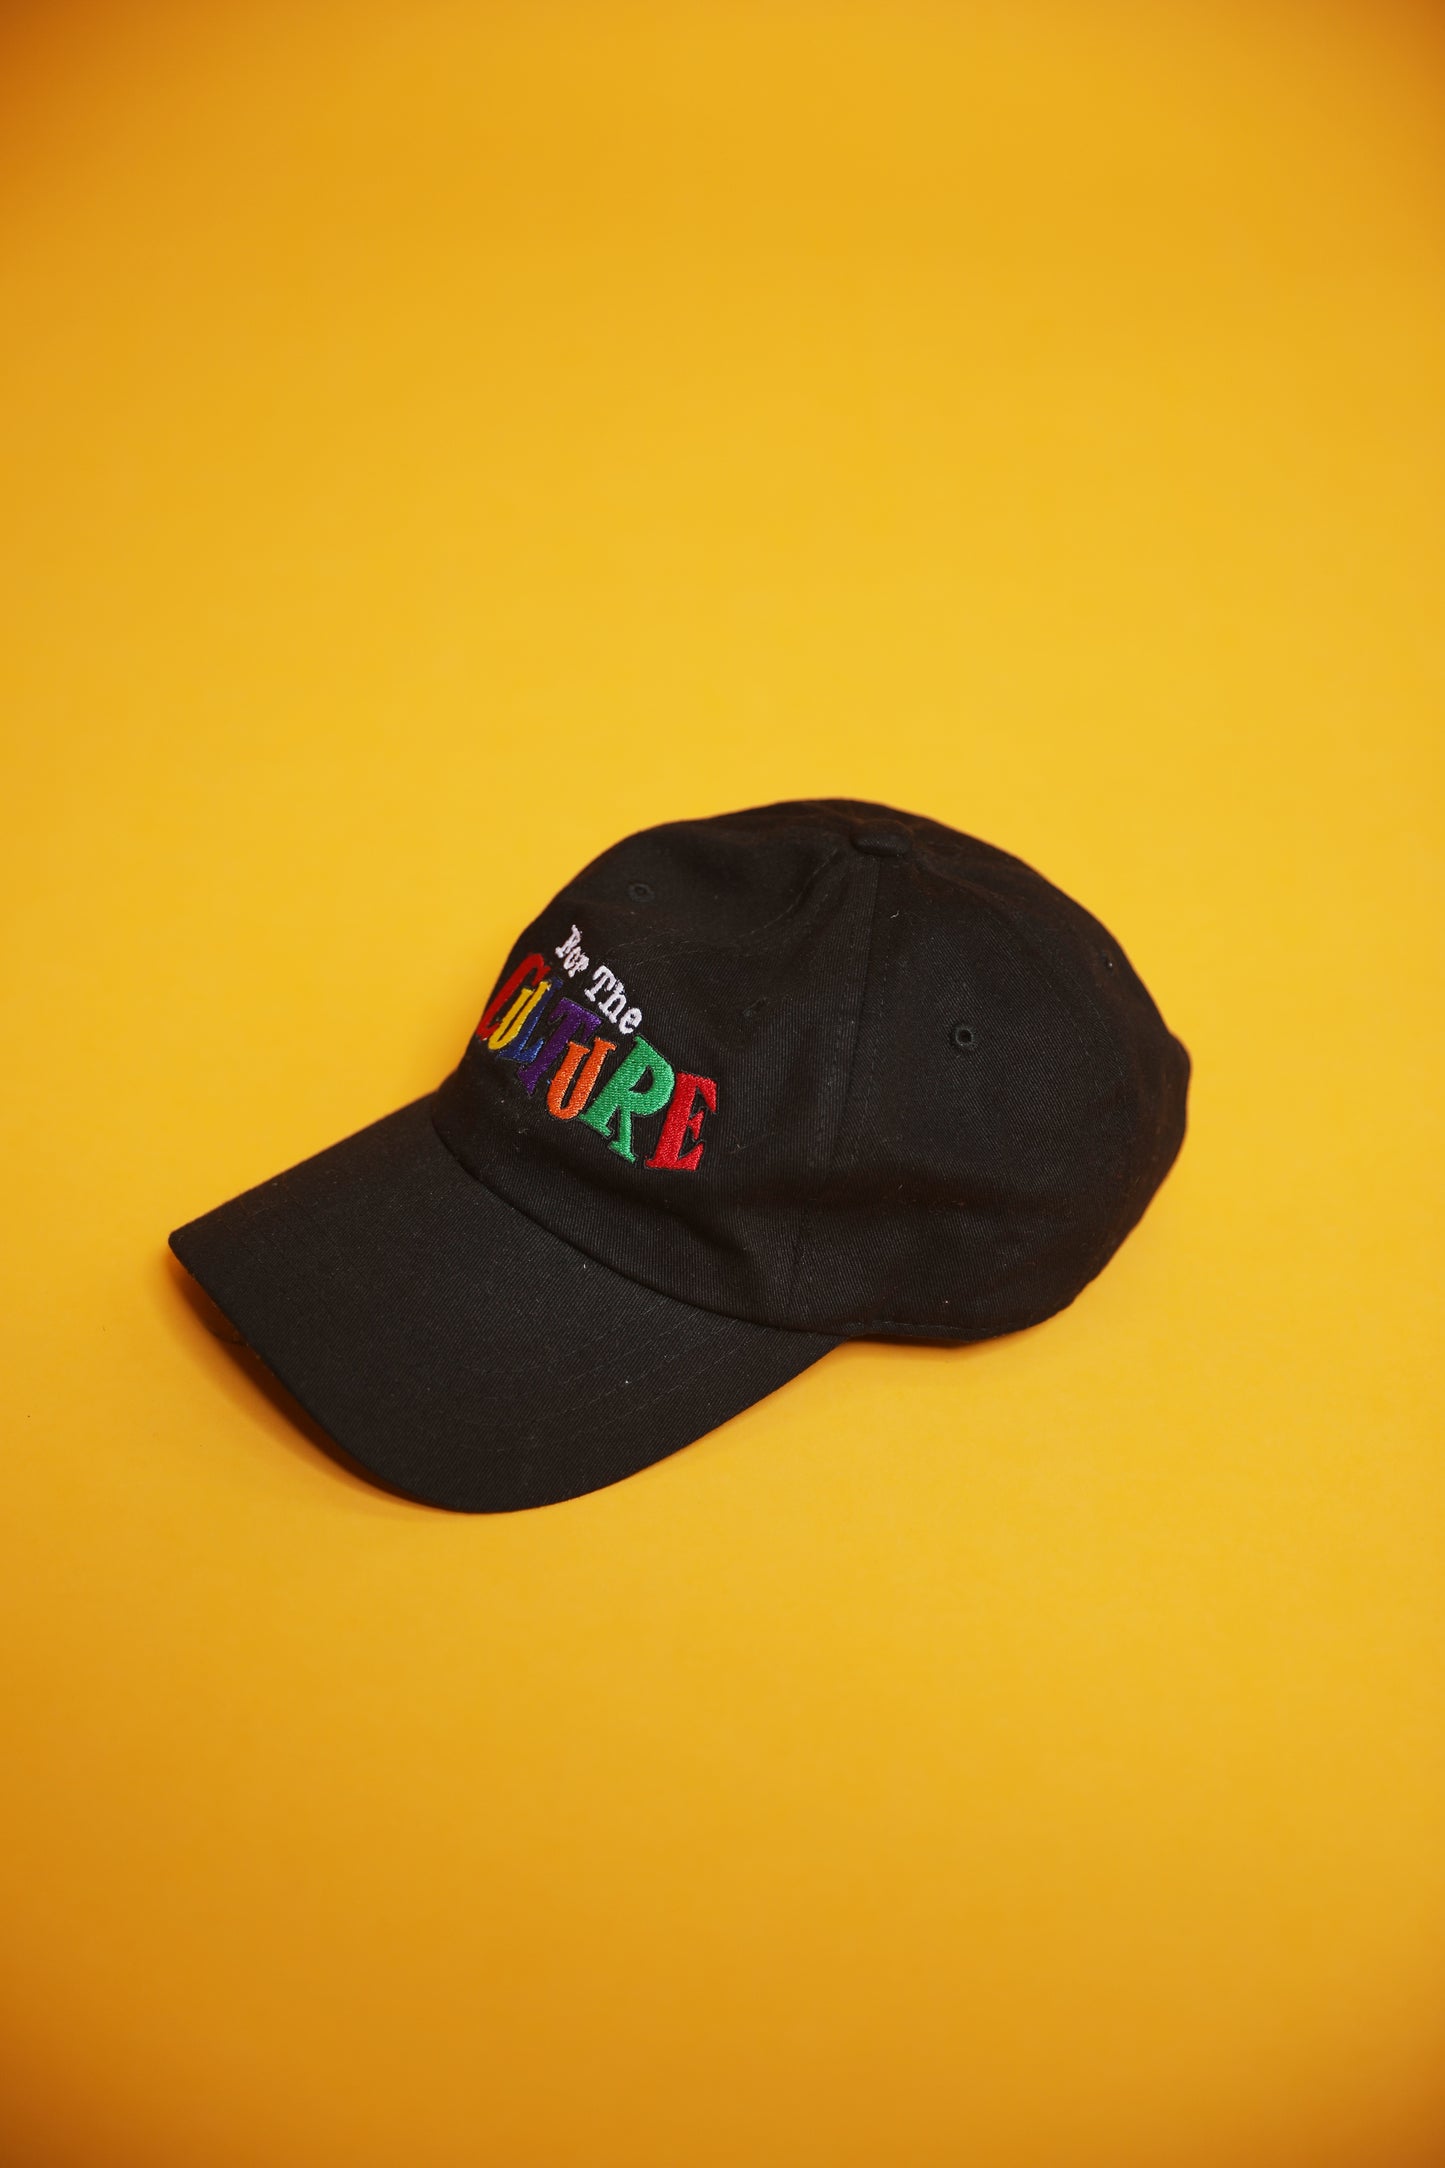 "For The Culture" Unisex Dad Hat in Distressed Black